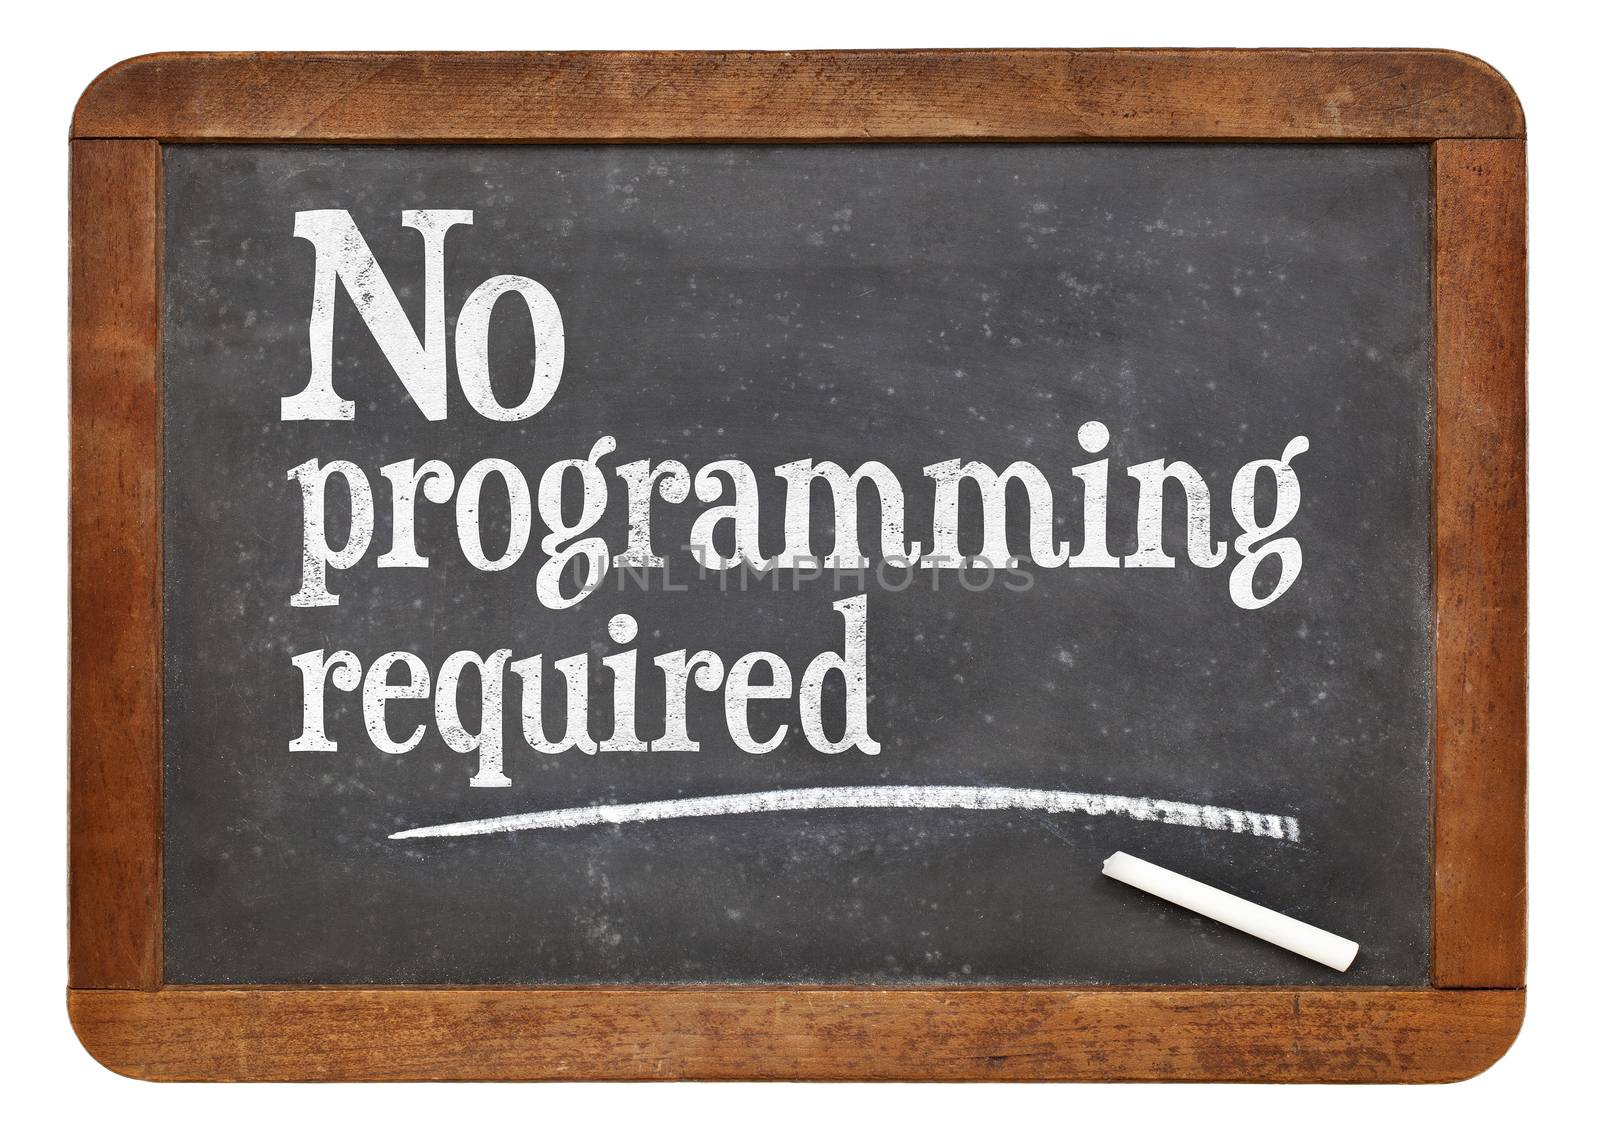 No programming required blackboard sign by PixelsAway